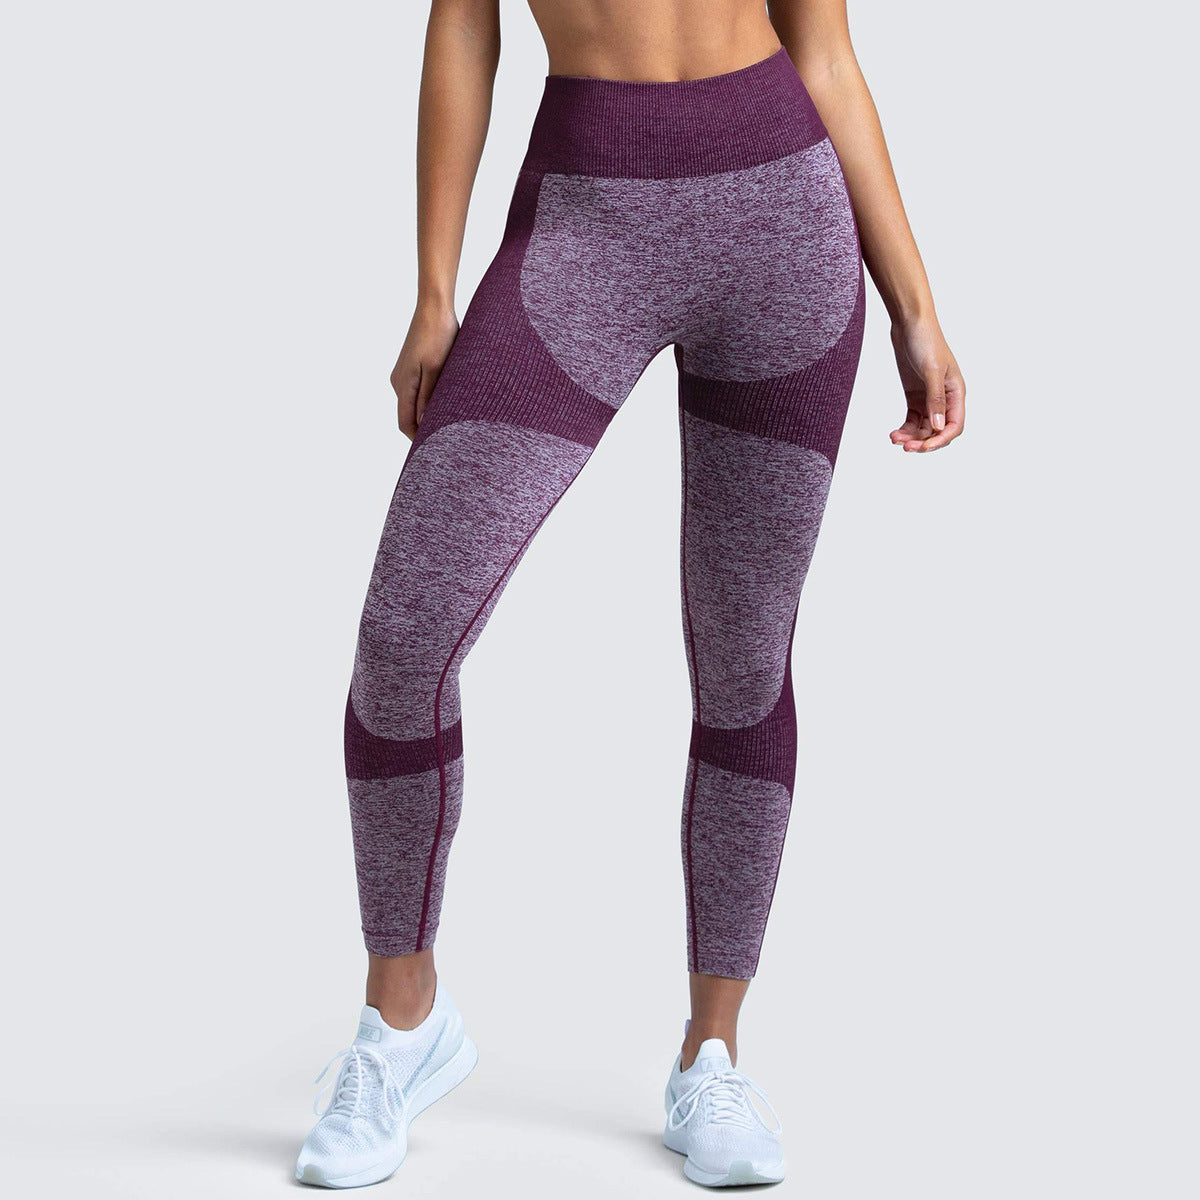 Aayomet Women's Hip Curling Sweat Wicking Exercise Pants Sexy Hip